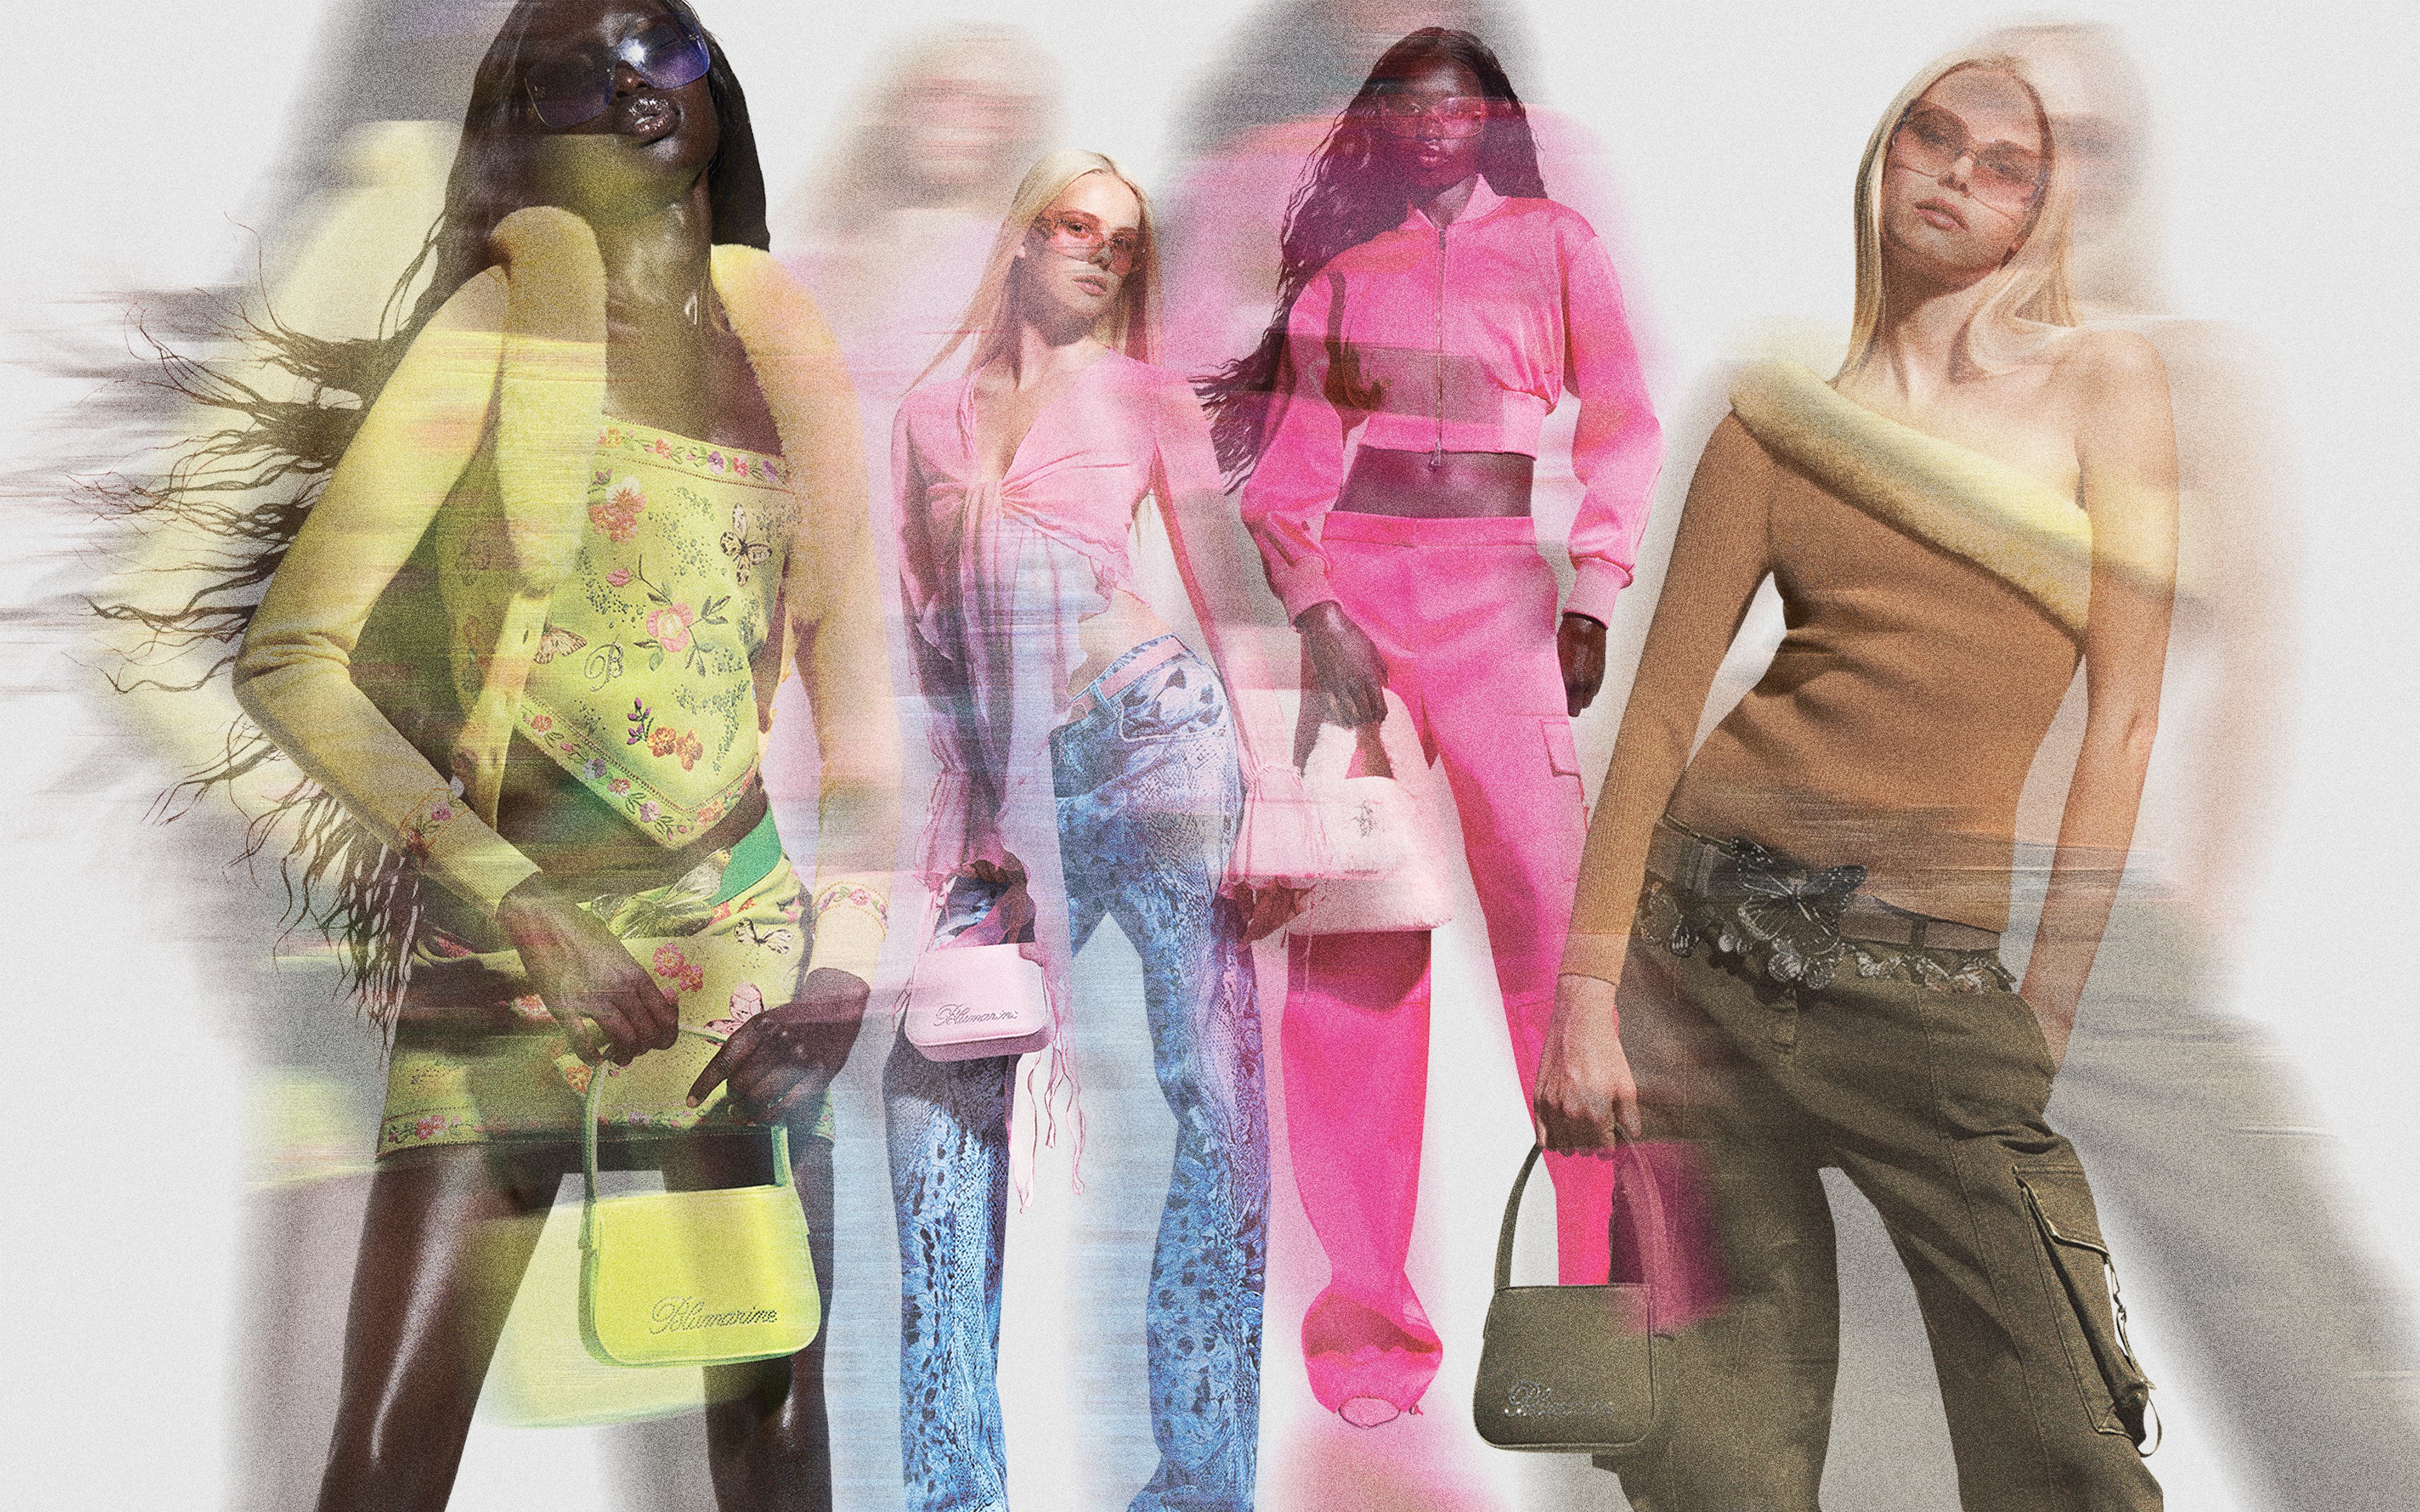 Y2K Aesthetic: Gen Z Is Reviving the 2000s Thin Obsession - FASHION Magazine